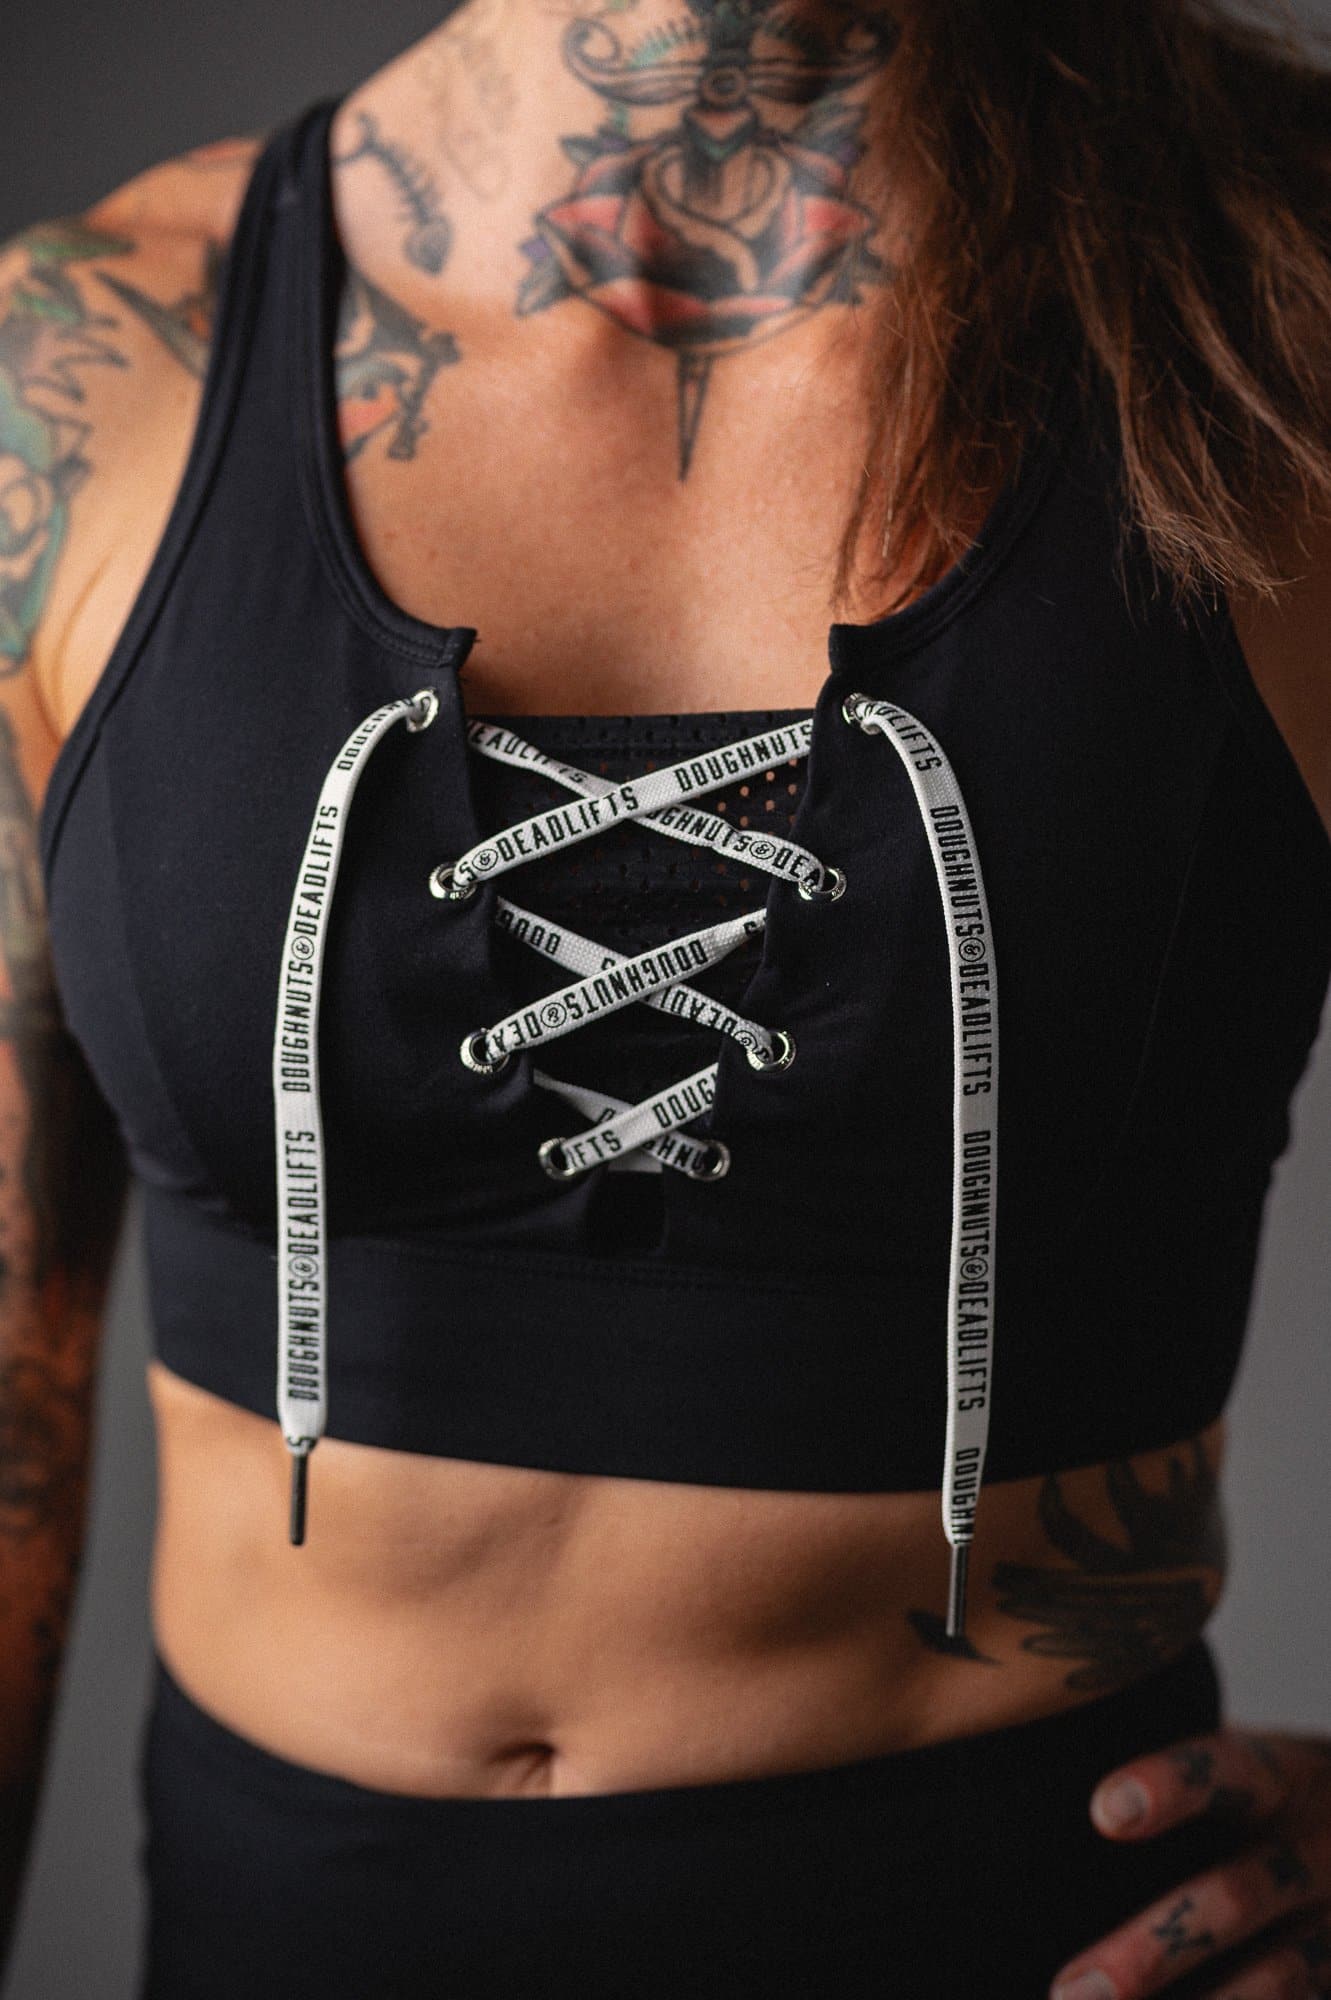 Doughnuts & Deadlifts EMPOWER Action Sports Bra (Black) - 9 for 9